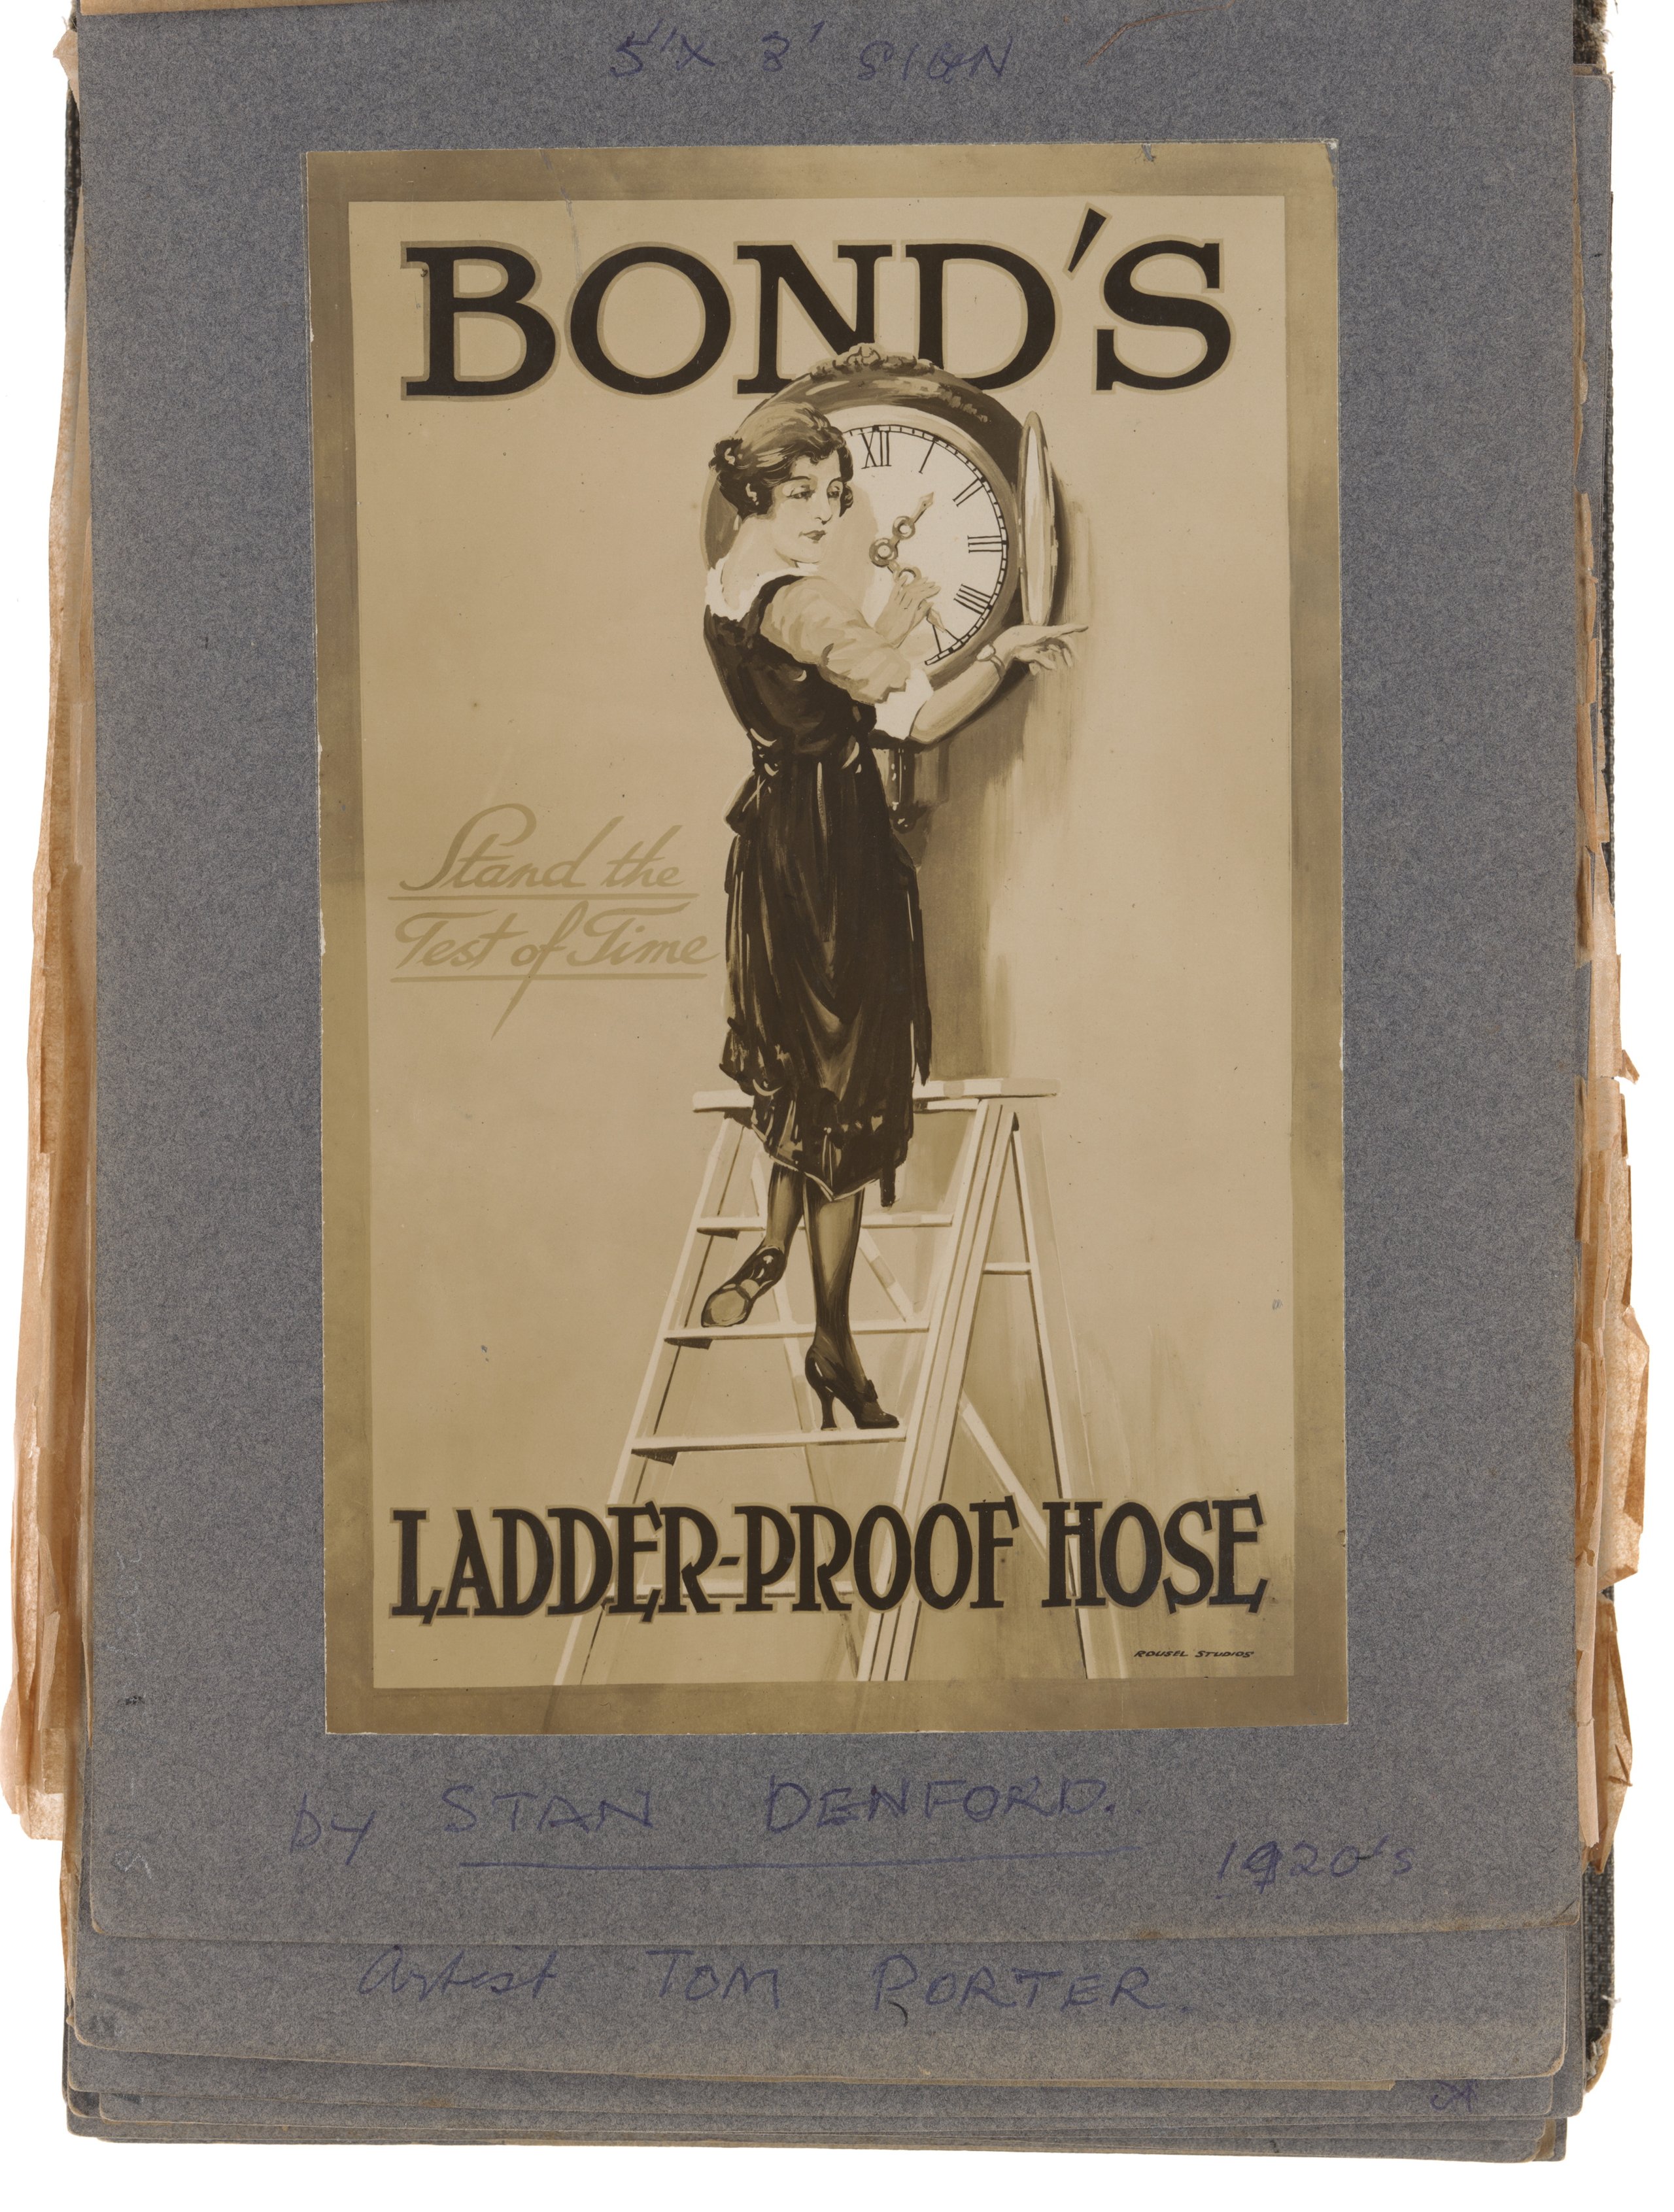 Photograph of advertisement for Bond's Ladder-proof hose designed by Rousel Studios